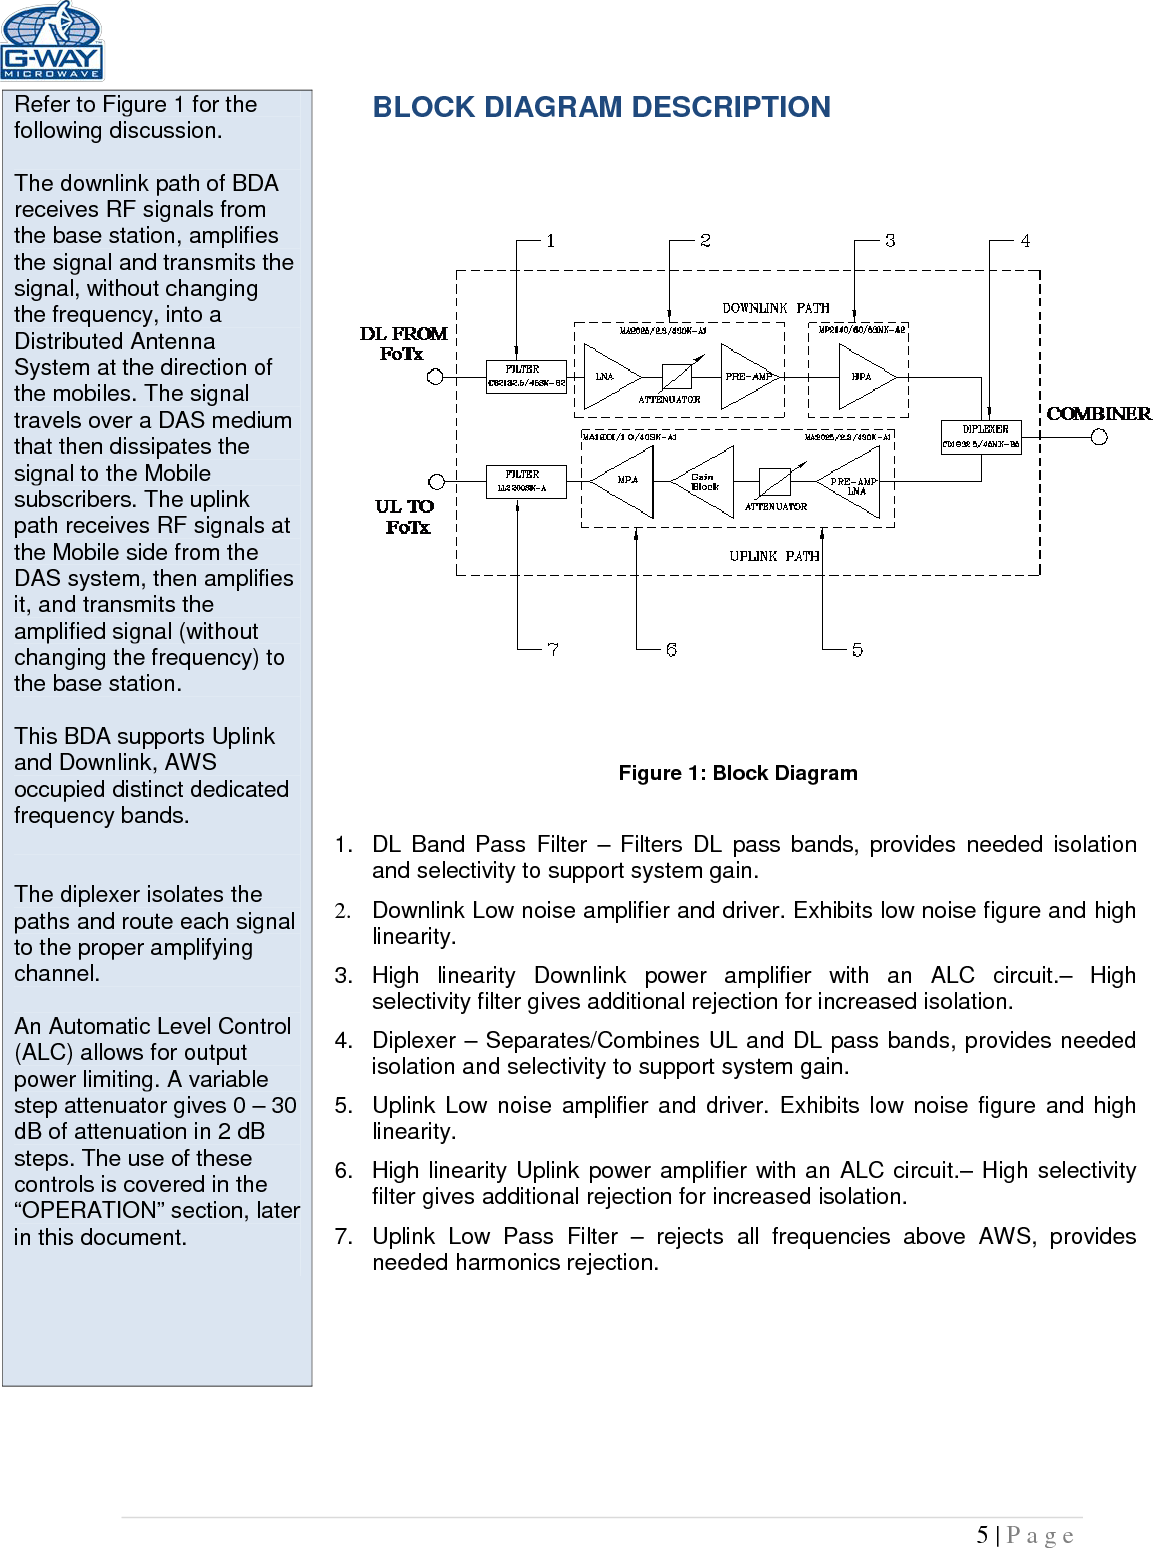   5 | Page  Refer to Figure 1 for the following discussion.  The downlink path of BDA receives RF signals from the base station, amplifies the signal and transmits the signal, without changing the frequency, into a Distributed Antenna System at the direction of the mobiles. The signal travels over a DAS medium that then dissipates the signal to the Mobile subscribers. The uplink path receives RF signals at the Mobile side from the DAS system, then amplifies it, and transmits the amplified signal (without changing the frequency) to the base station.   This BDA supports Uplink and Downlink, AWS occupied distinct dedicated frequency bands.   The diplexer isolates the paths and route each signal to the proper amplifying channel.  An Automatic Level Control (ALC) allows for output power limiting. A variable step attenuator gives 0 – 30 dB of attenuation in 2 dB steps. The use of these controls is covered in the “OPERATION” section, later in this document.   BLOCK DIAGRAM DESCRIPTION    Figure 1: Block Diagram  1. DL Band Pass Filter  – Filters  DL pass bands, provides needed isolation and selectivity to support system gain. 2. Downlink Low noise amplifier and driver. Exhibits low noise figure and high linearity. 3.  High  linearity Downlink power  amplifier with an ALC circuit.–  High selectivity filter gives additional rejection for increased isolation.  4. Diplexer – Separates/Combines UL and DL pass bands, provides needed isolation and selectivity to support system gain. 5. Uplink Low noise amplifier and driver. Exhibits low noise figure and high linearity. 6.  High linearity Uplink power amplifier with an ALC circuit.– High selectivity filter gives additional rejection for increased isolation.  7. Uplink Low Pass Filter  –  rejects all frequencies above AWS, provides needed harmonics rejection.    